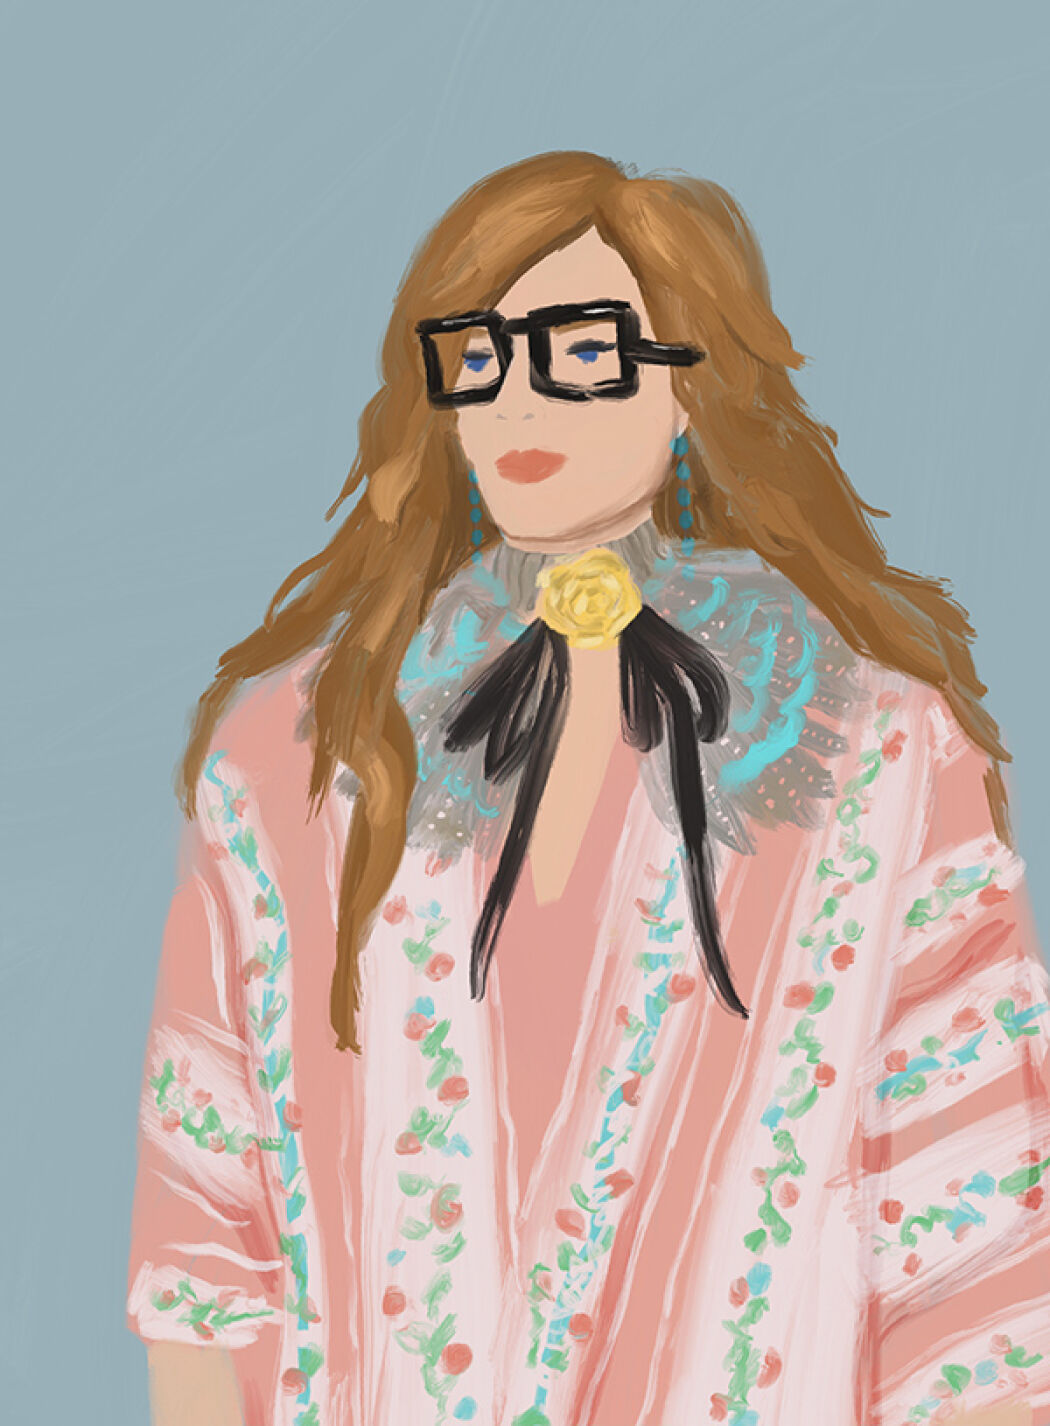 Beauty and skincare illustration by Christina Gliha for Gucci